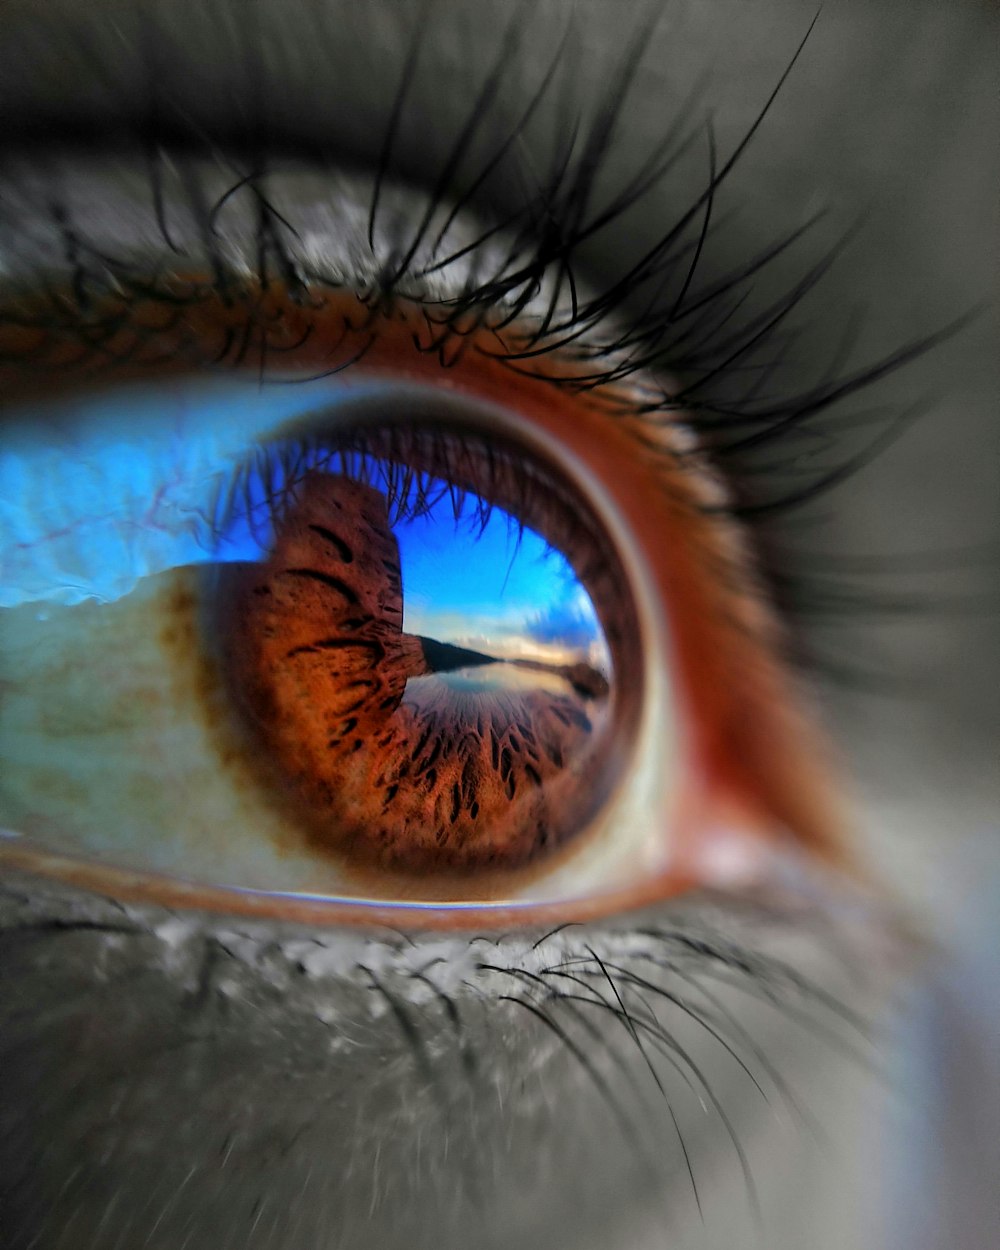 a close up of a person's eye with the reflection of the sky in